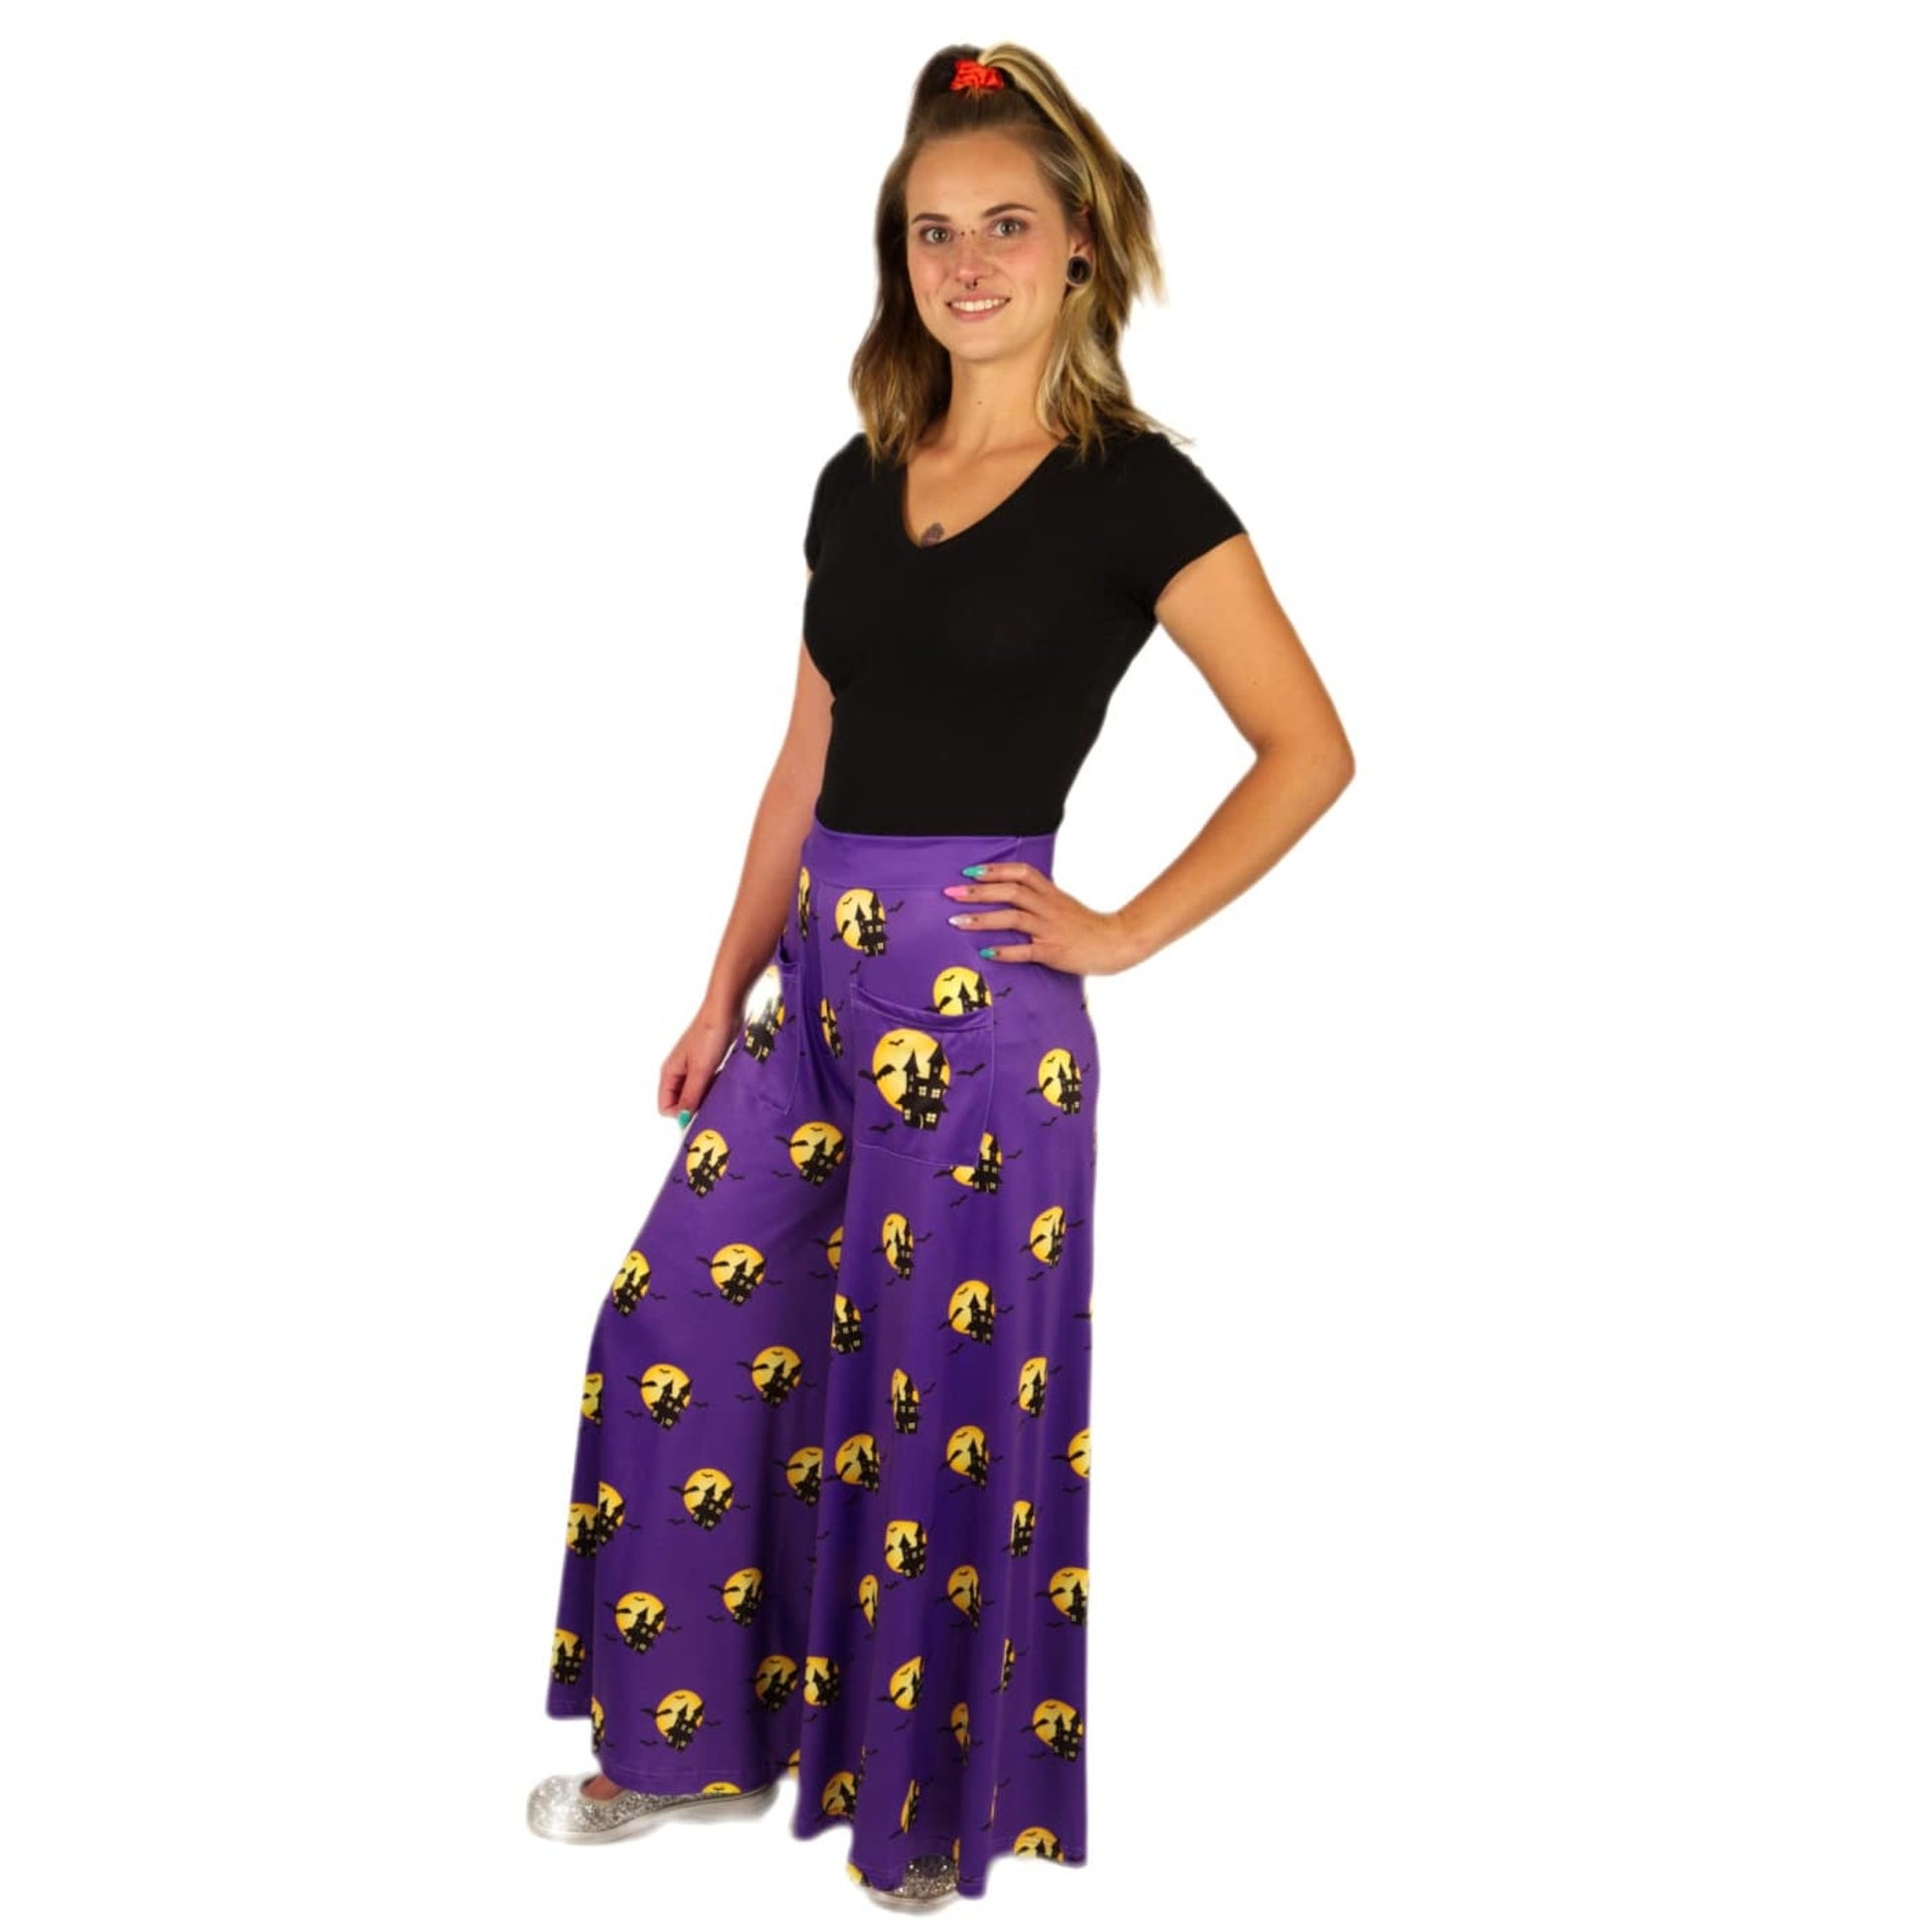 Haunted House Wide Leg Pants by RainbowsAndFairies.com.au (Addams Family - Bats - Purple - Pants With Pockets - Vintage Inspired - Flares - Halloween) - SKU: CL_WIDEL_HAUNT_ORG - Pic-04